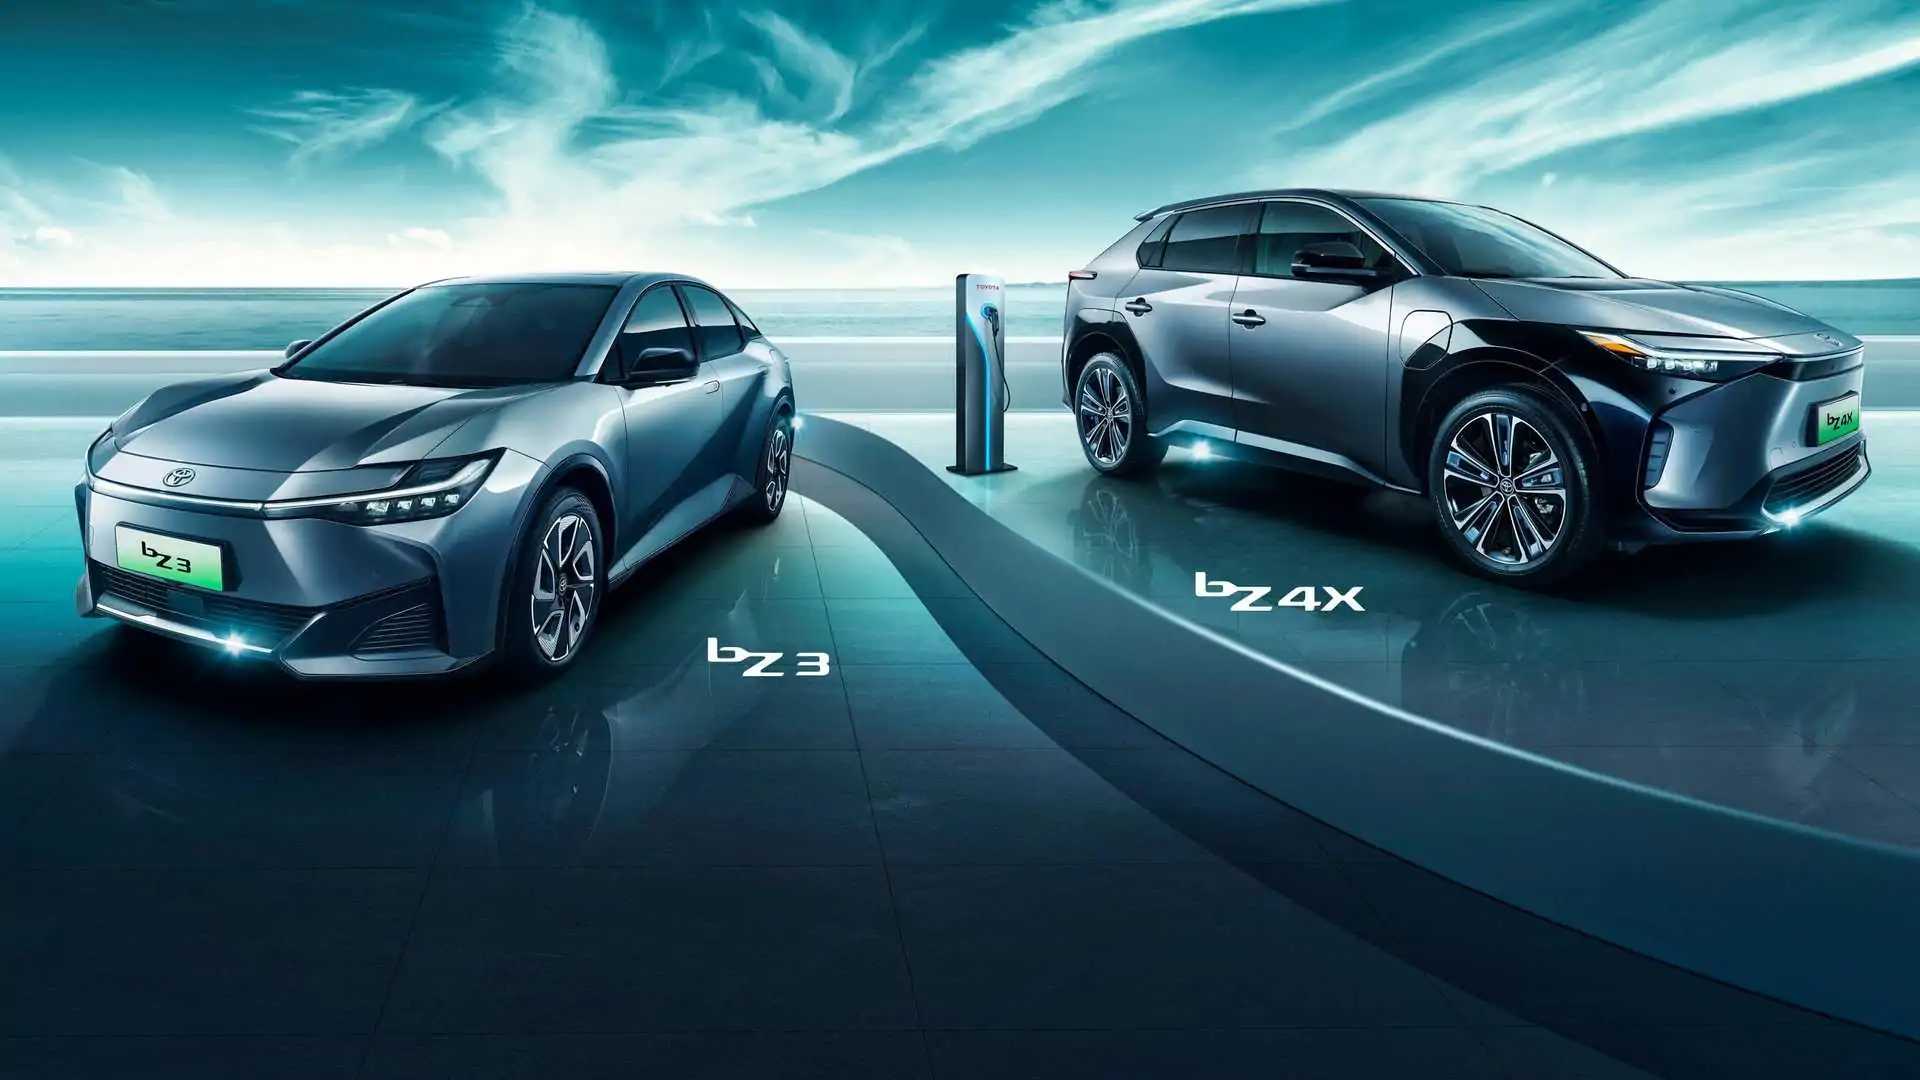 toyota to develop competitive evs specifically for china